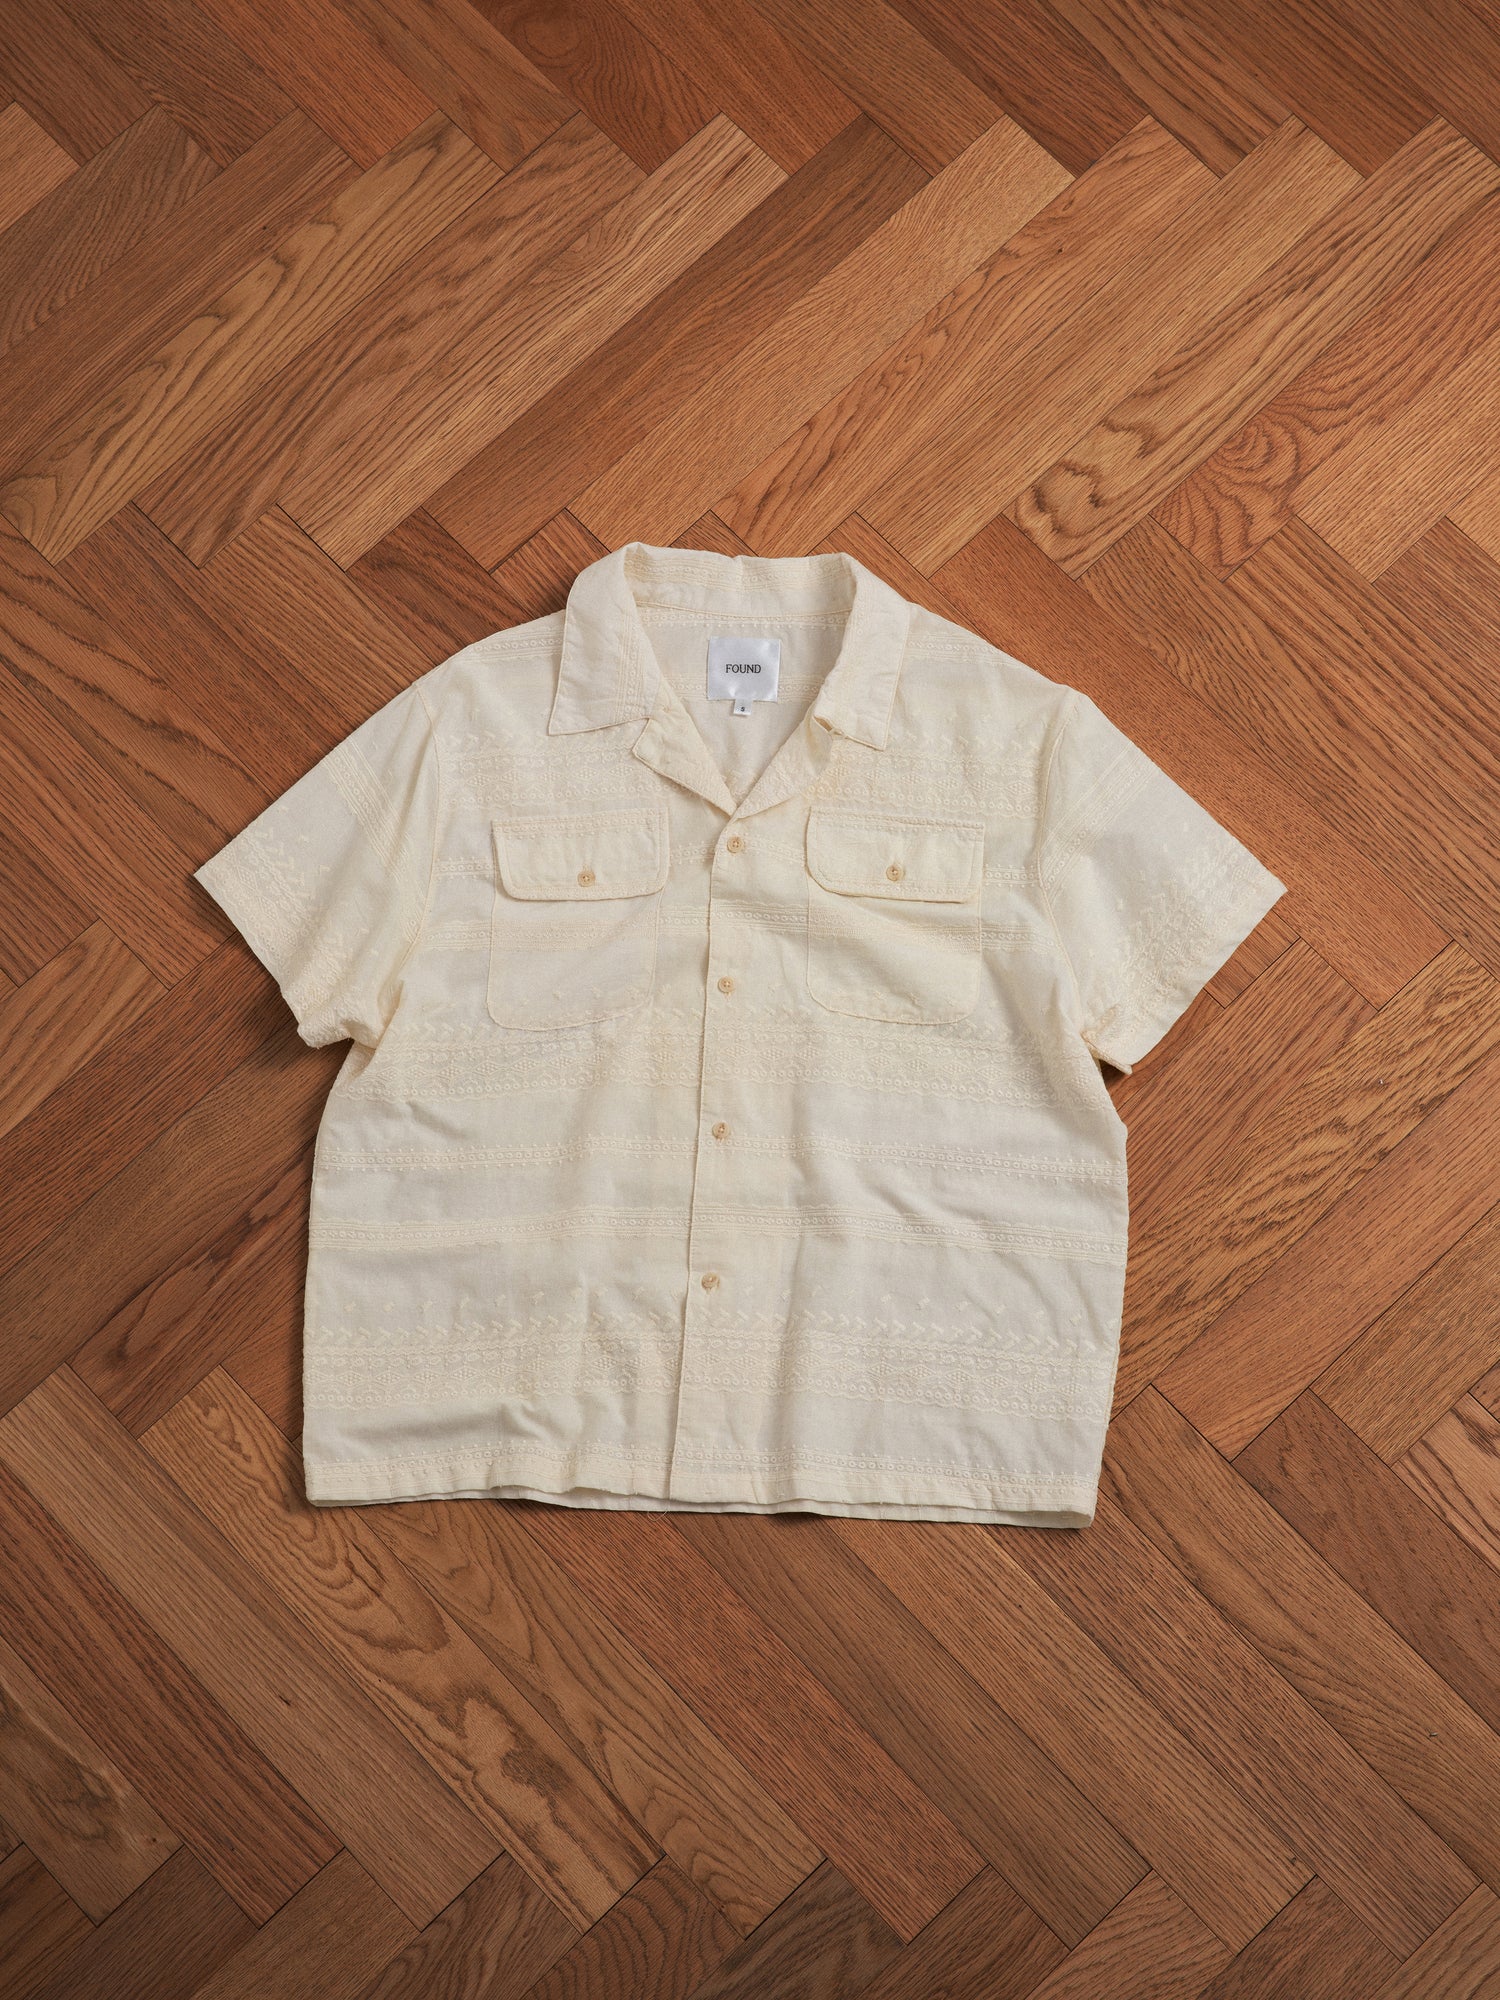 A Found Lace SS Camp Shirt with delicate lace detailing on a wooden floor.